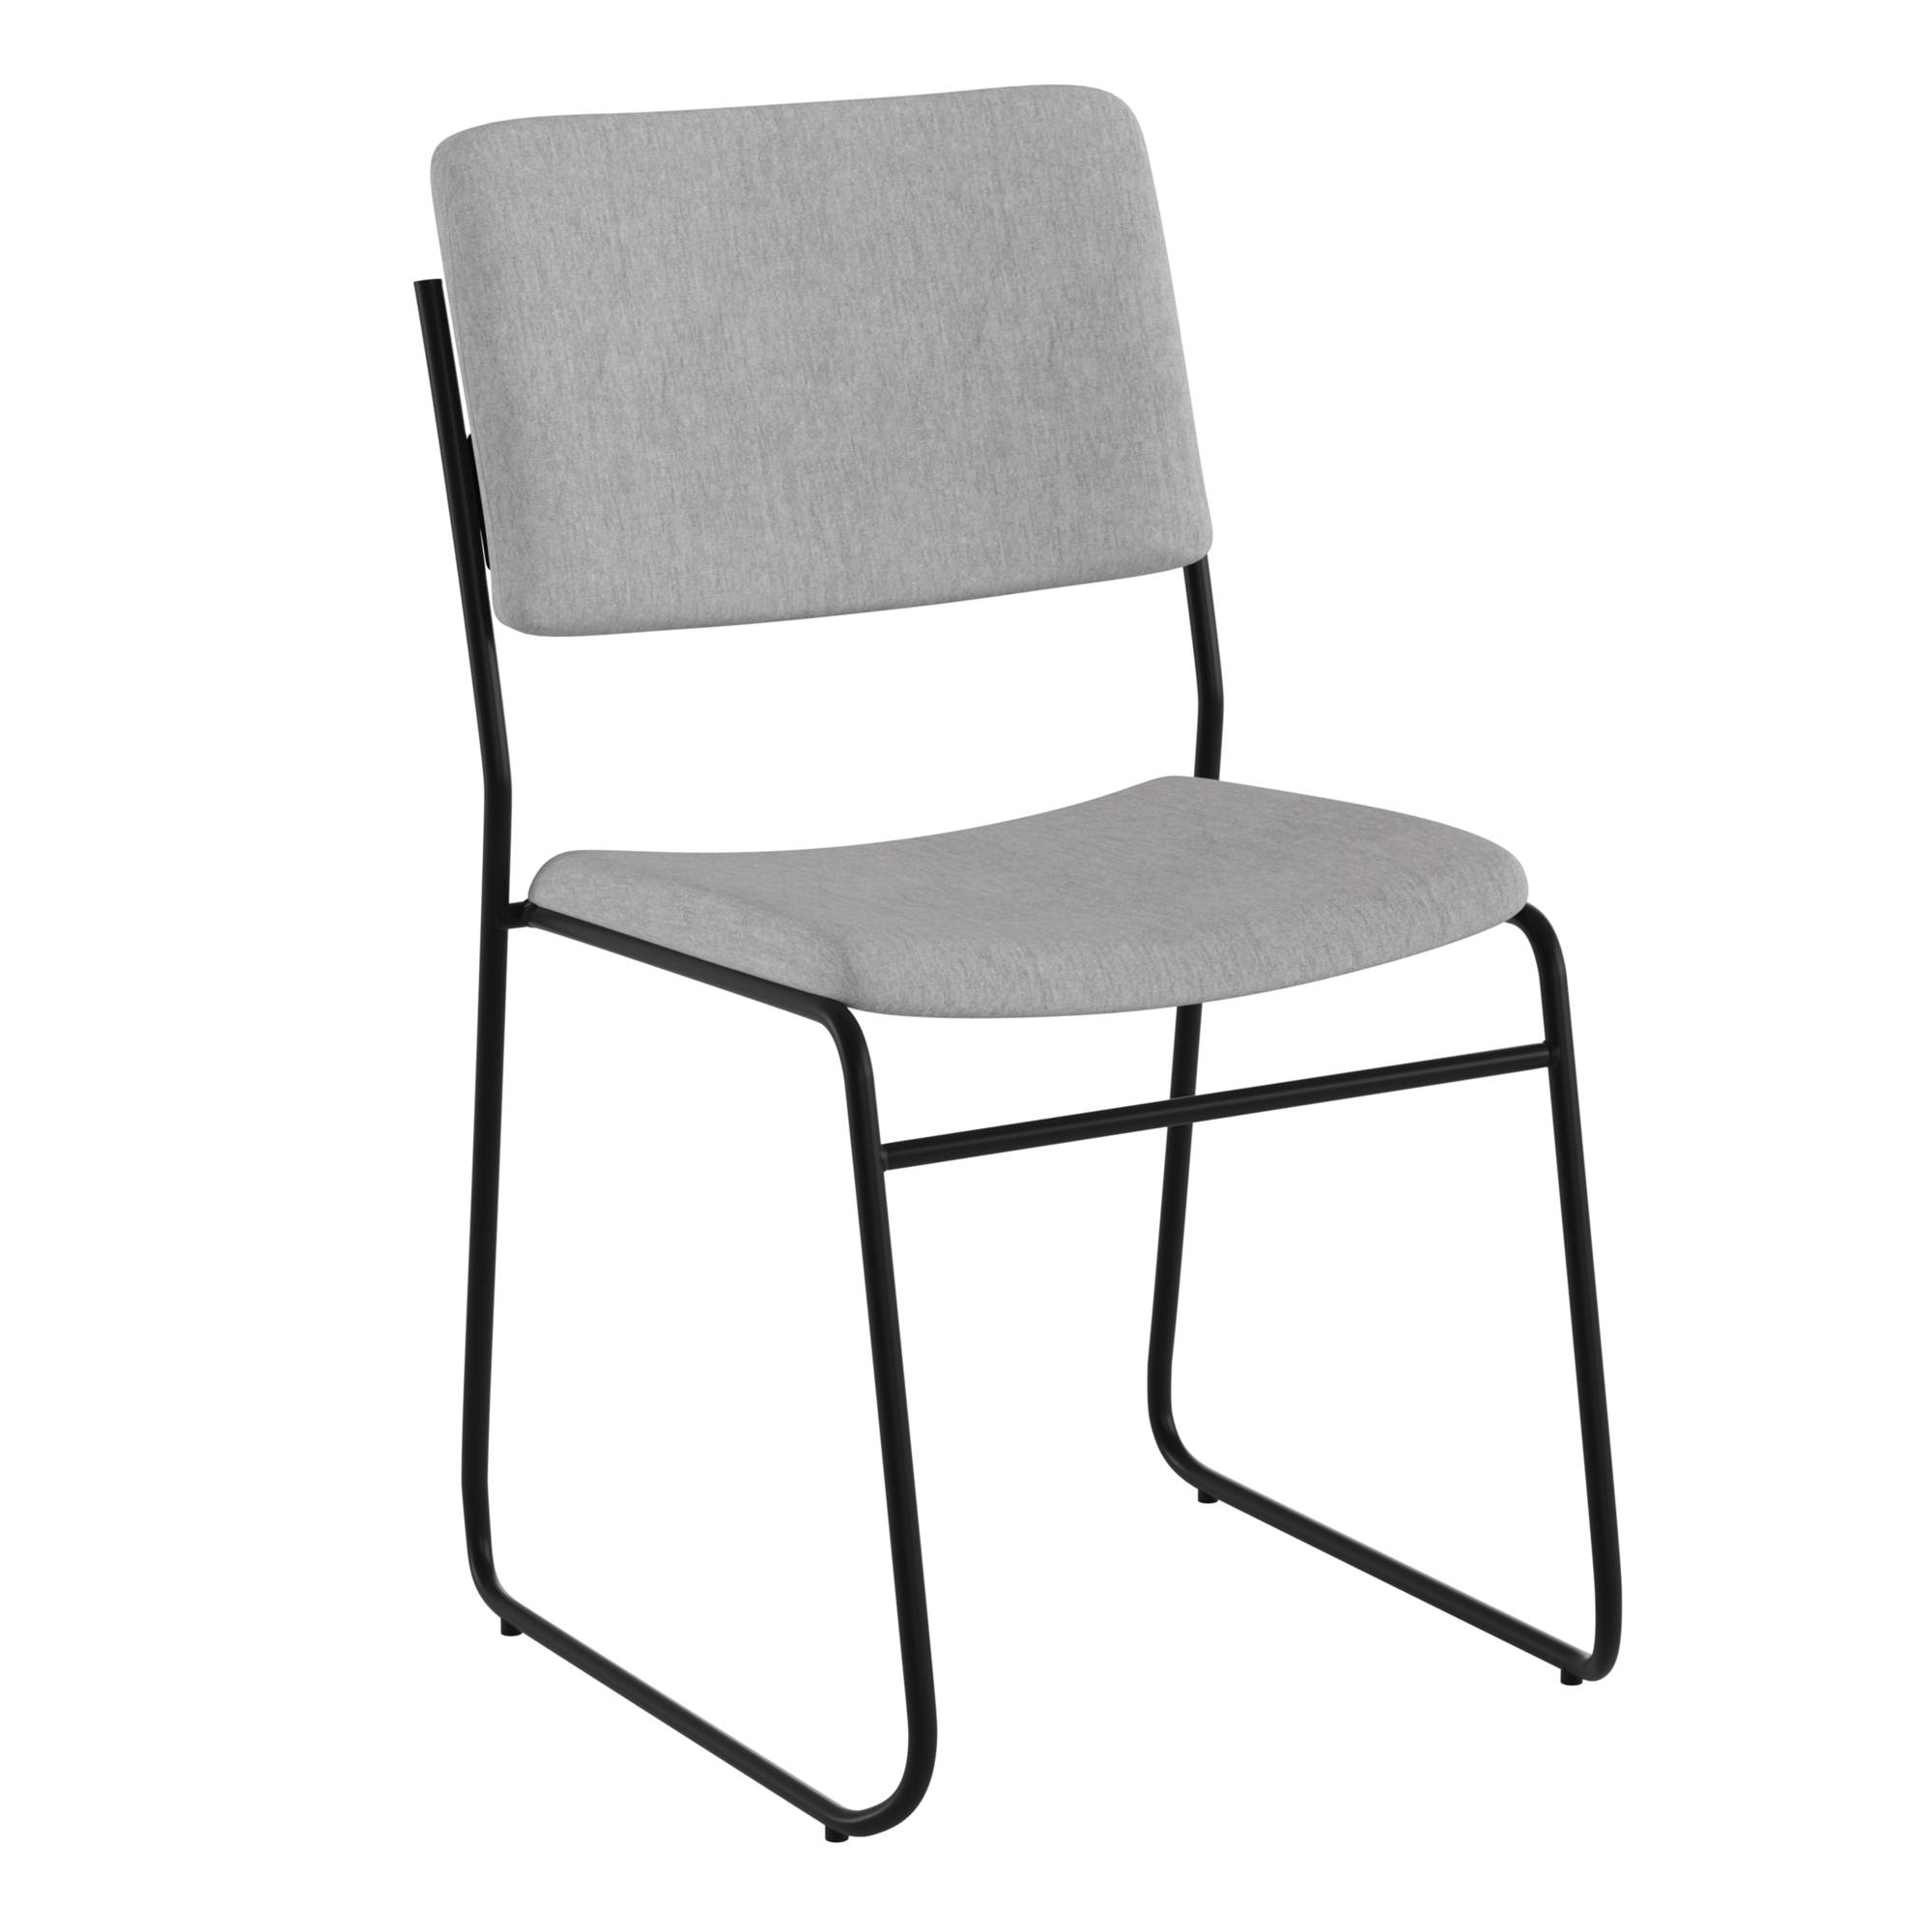 Flash Furniture, 500 lb. Capacity High Density Gray Fabric Chair, Primary Color Gray, Included (qty.) 1, Model XU8700GYB30